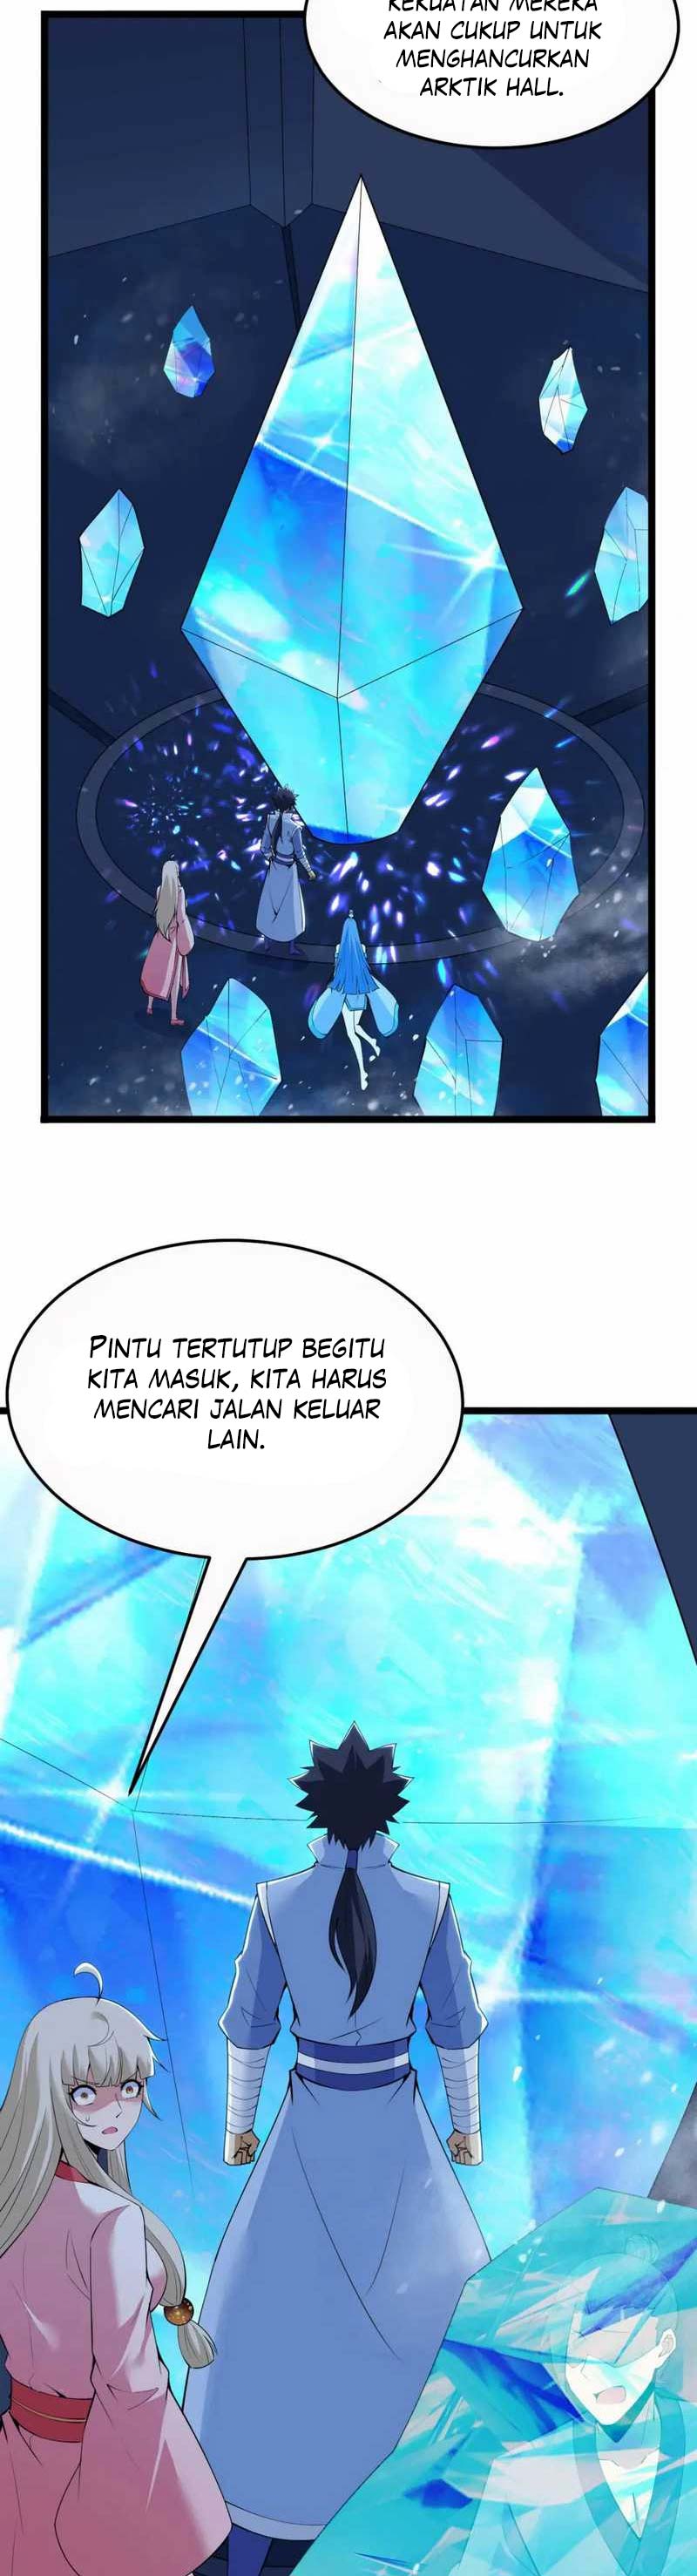 Dilarang COPAS - situs resmi www.mangacanblog.com - Komik i just want to be beaten to death by everyone 147 - chapter 147 148 Indonesia i just want to be beaten to death by everyone 147 - chapter 147 Terbaru 12|Baca Manga Komik Indonesia|Mangacan